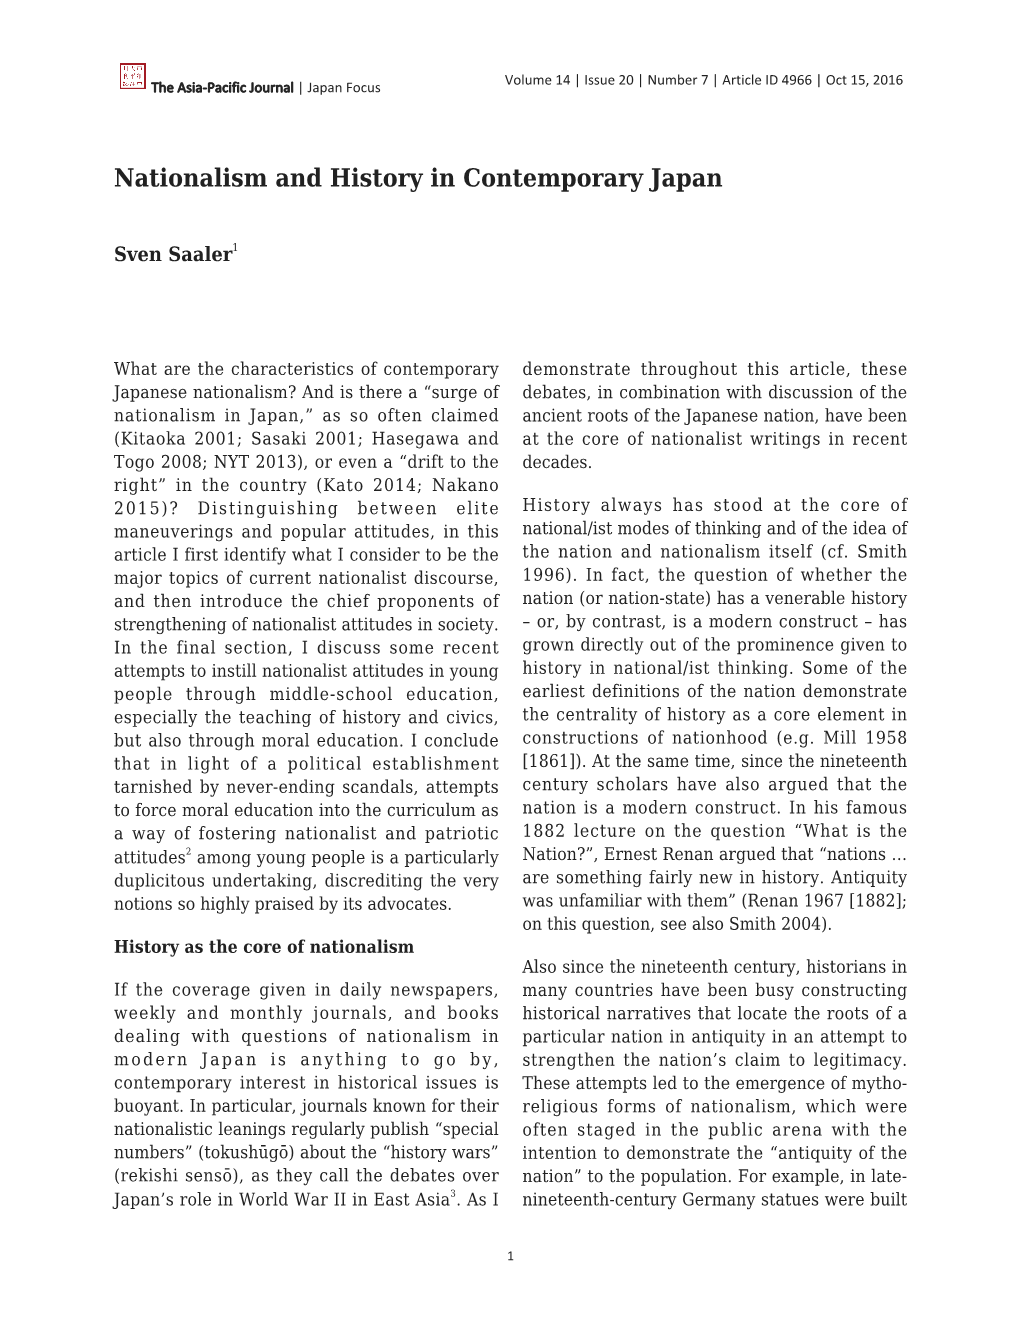 Nationalism and History in Contemporary Japan